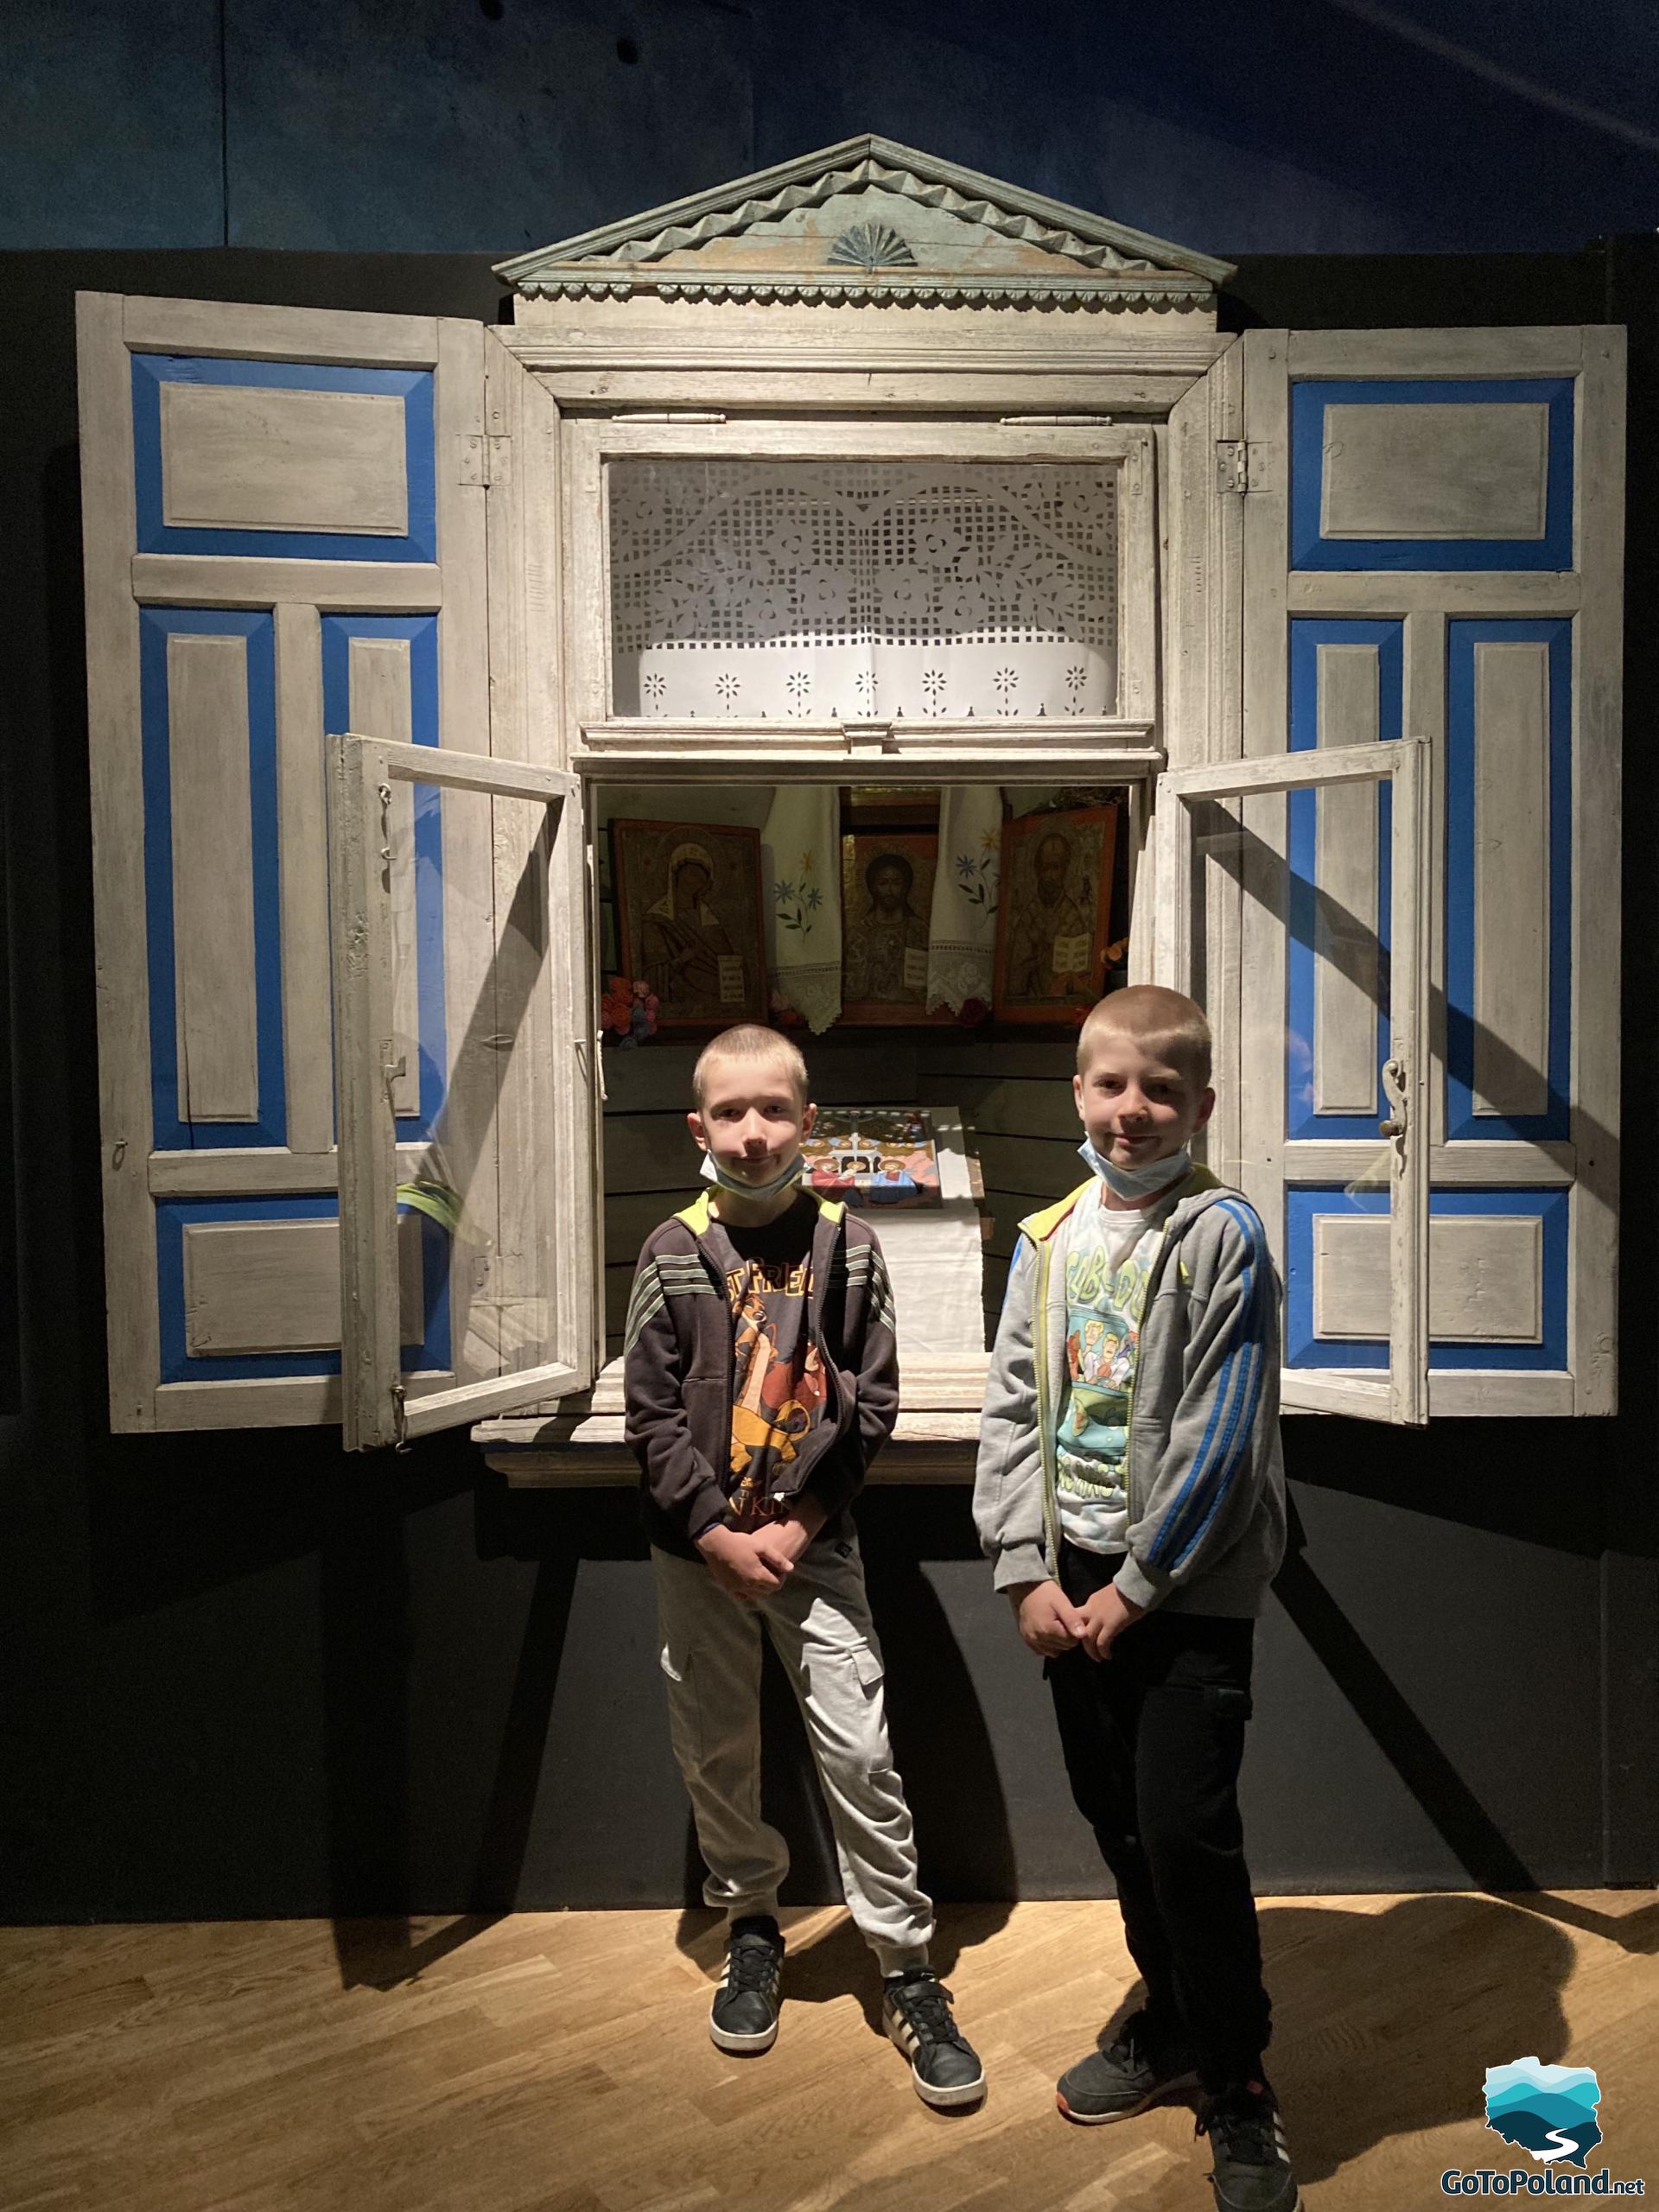 two boys are standing in front of an old wooden window, inside there is a stylized chamber with icons